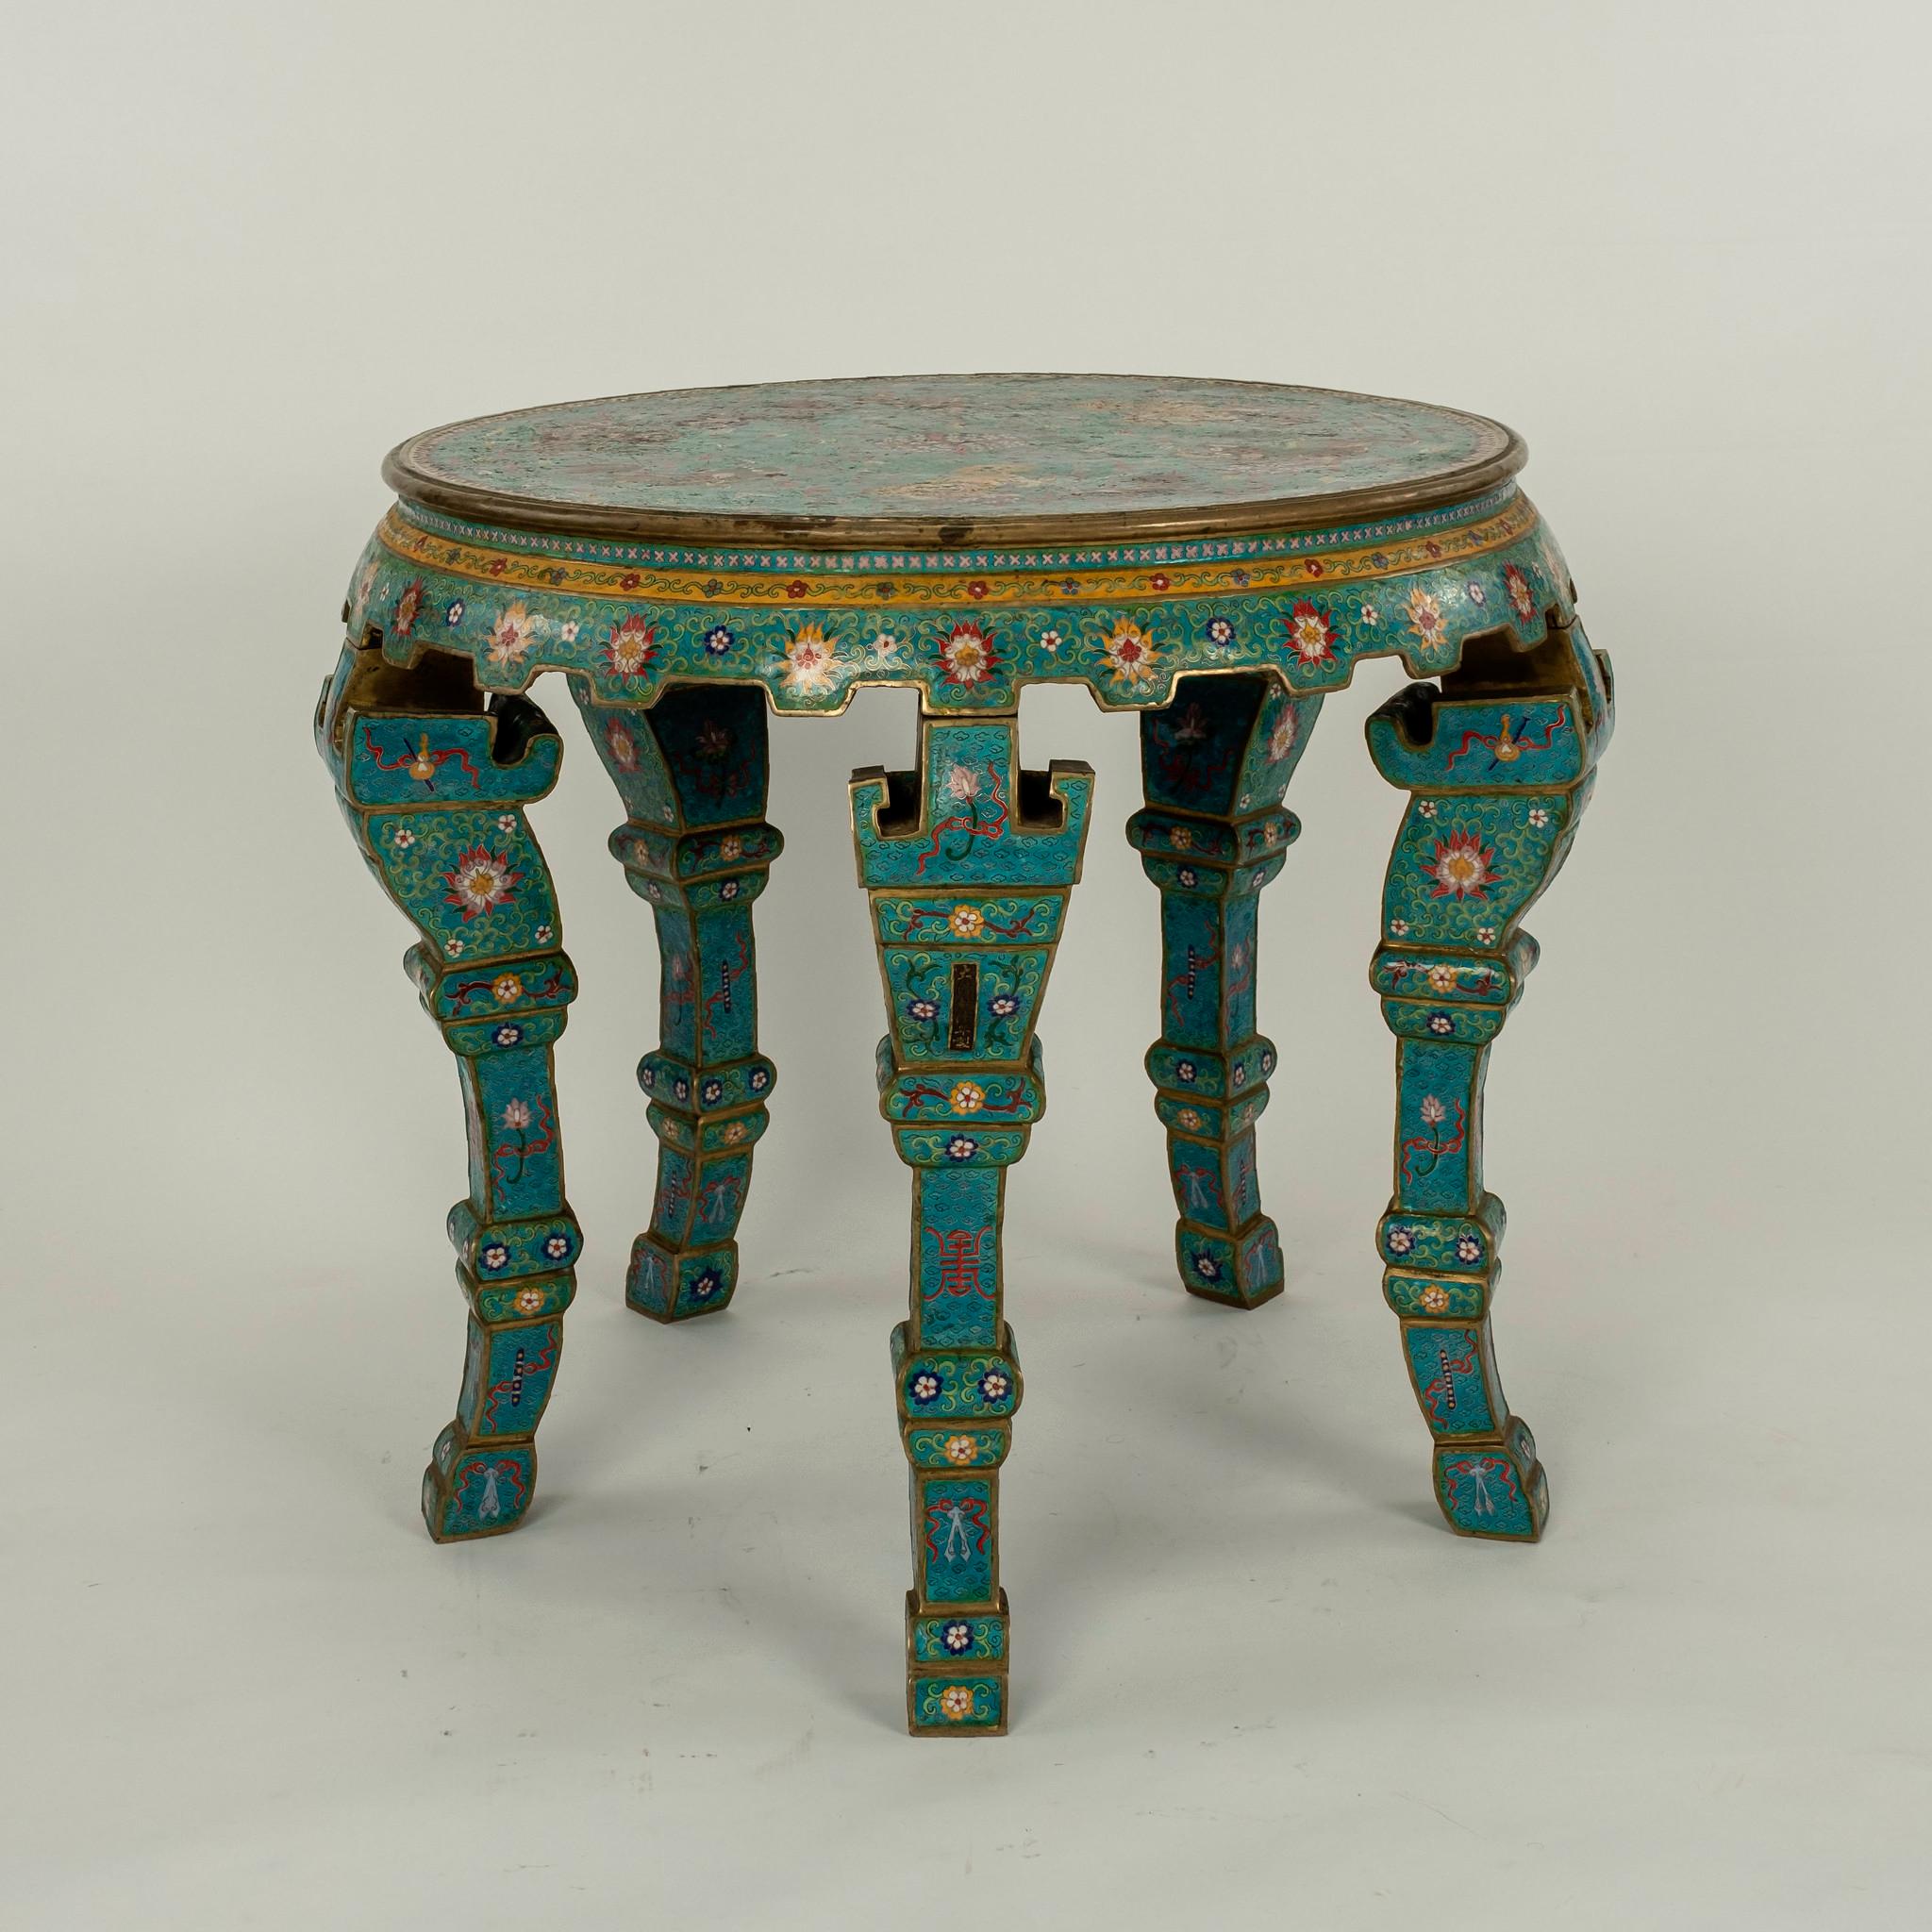 Early large 20th century bronze Qing style cloisonné center table. Thisl large form table features extraordinary workmanship with stunningly rare Imperial colors and is heavily decorated with auspicious symbolism including happiness characters, foo